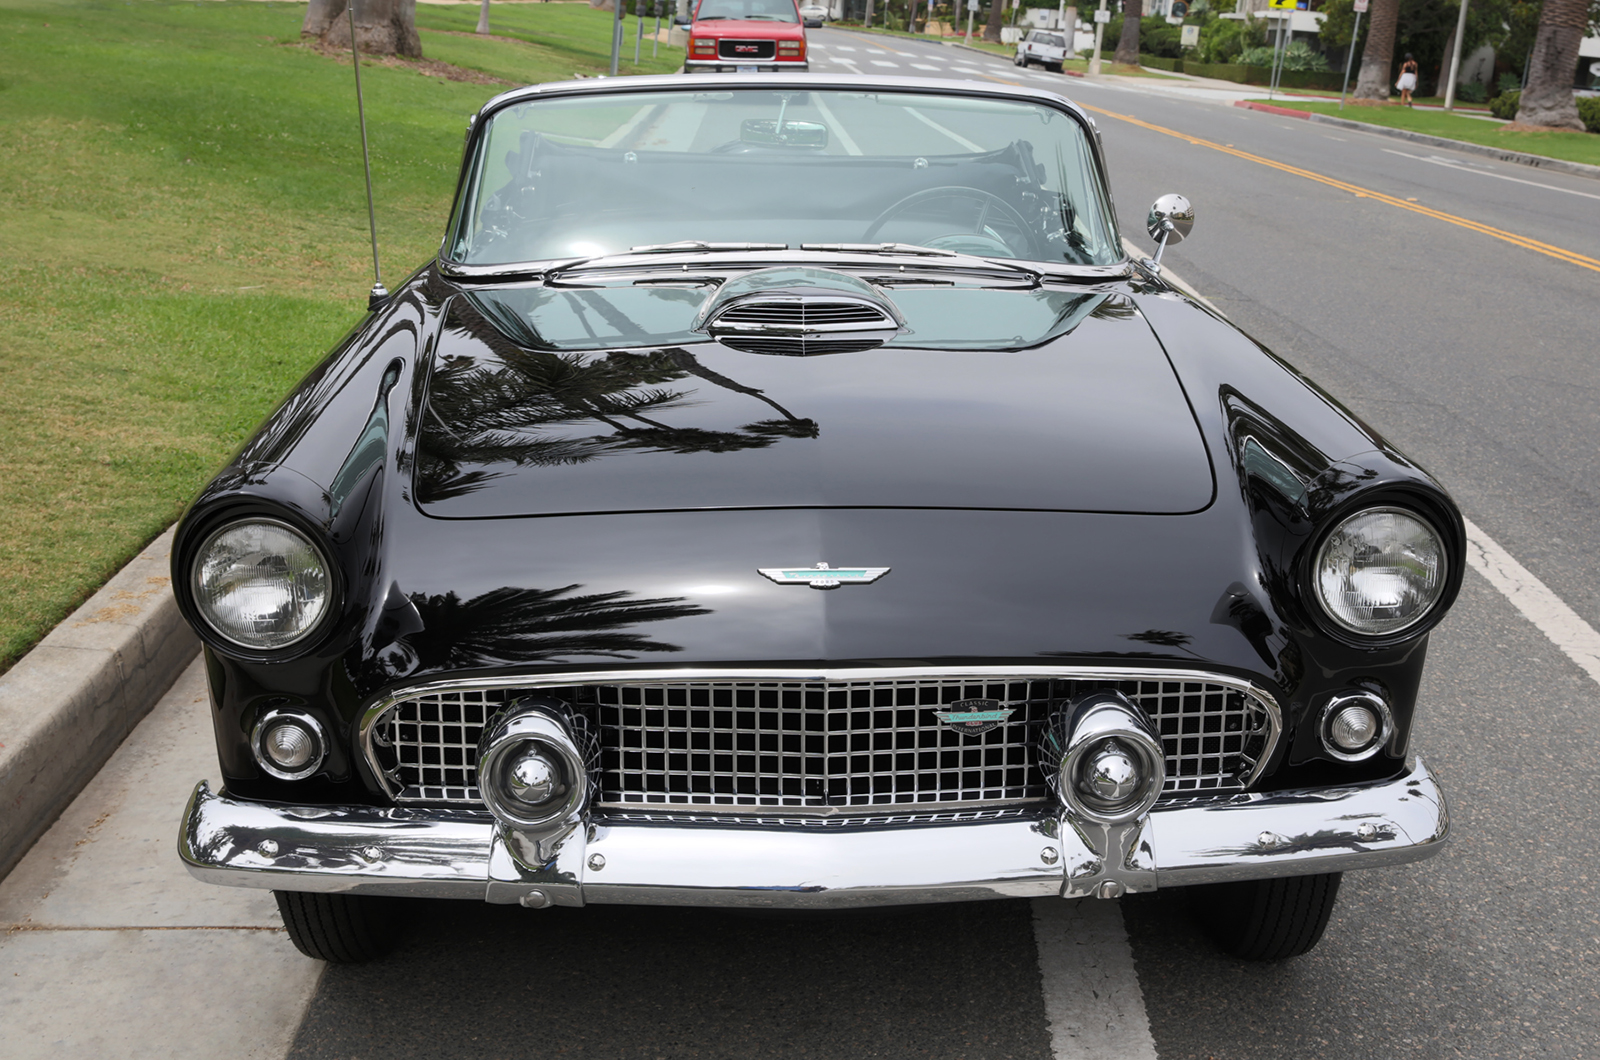 Classic & Sports Car – Marilyn Monroe's Thunderbird is coming to auction for the first time